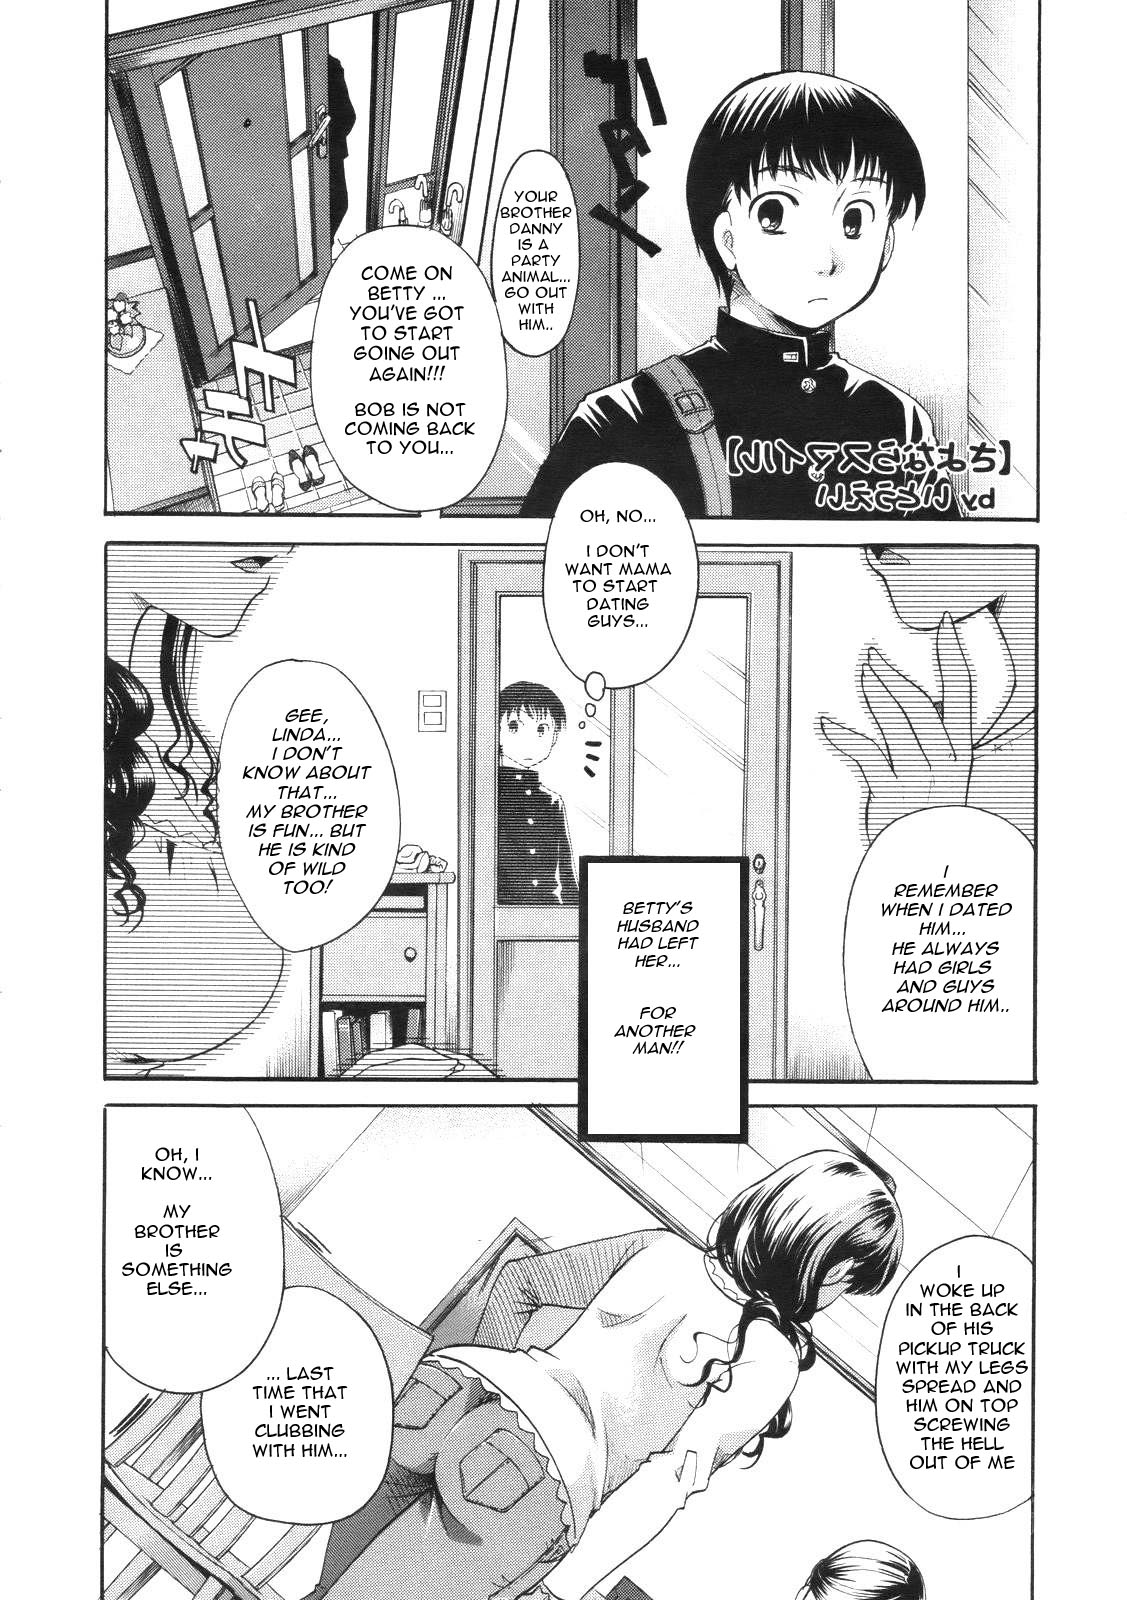 The Coolest Mom Ever [English] [Rewrite] [olddog51] page 1 full